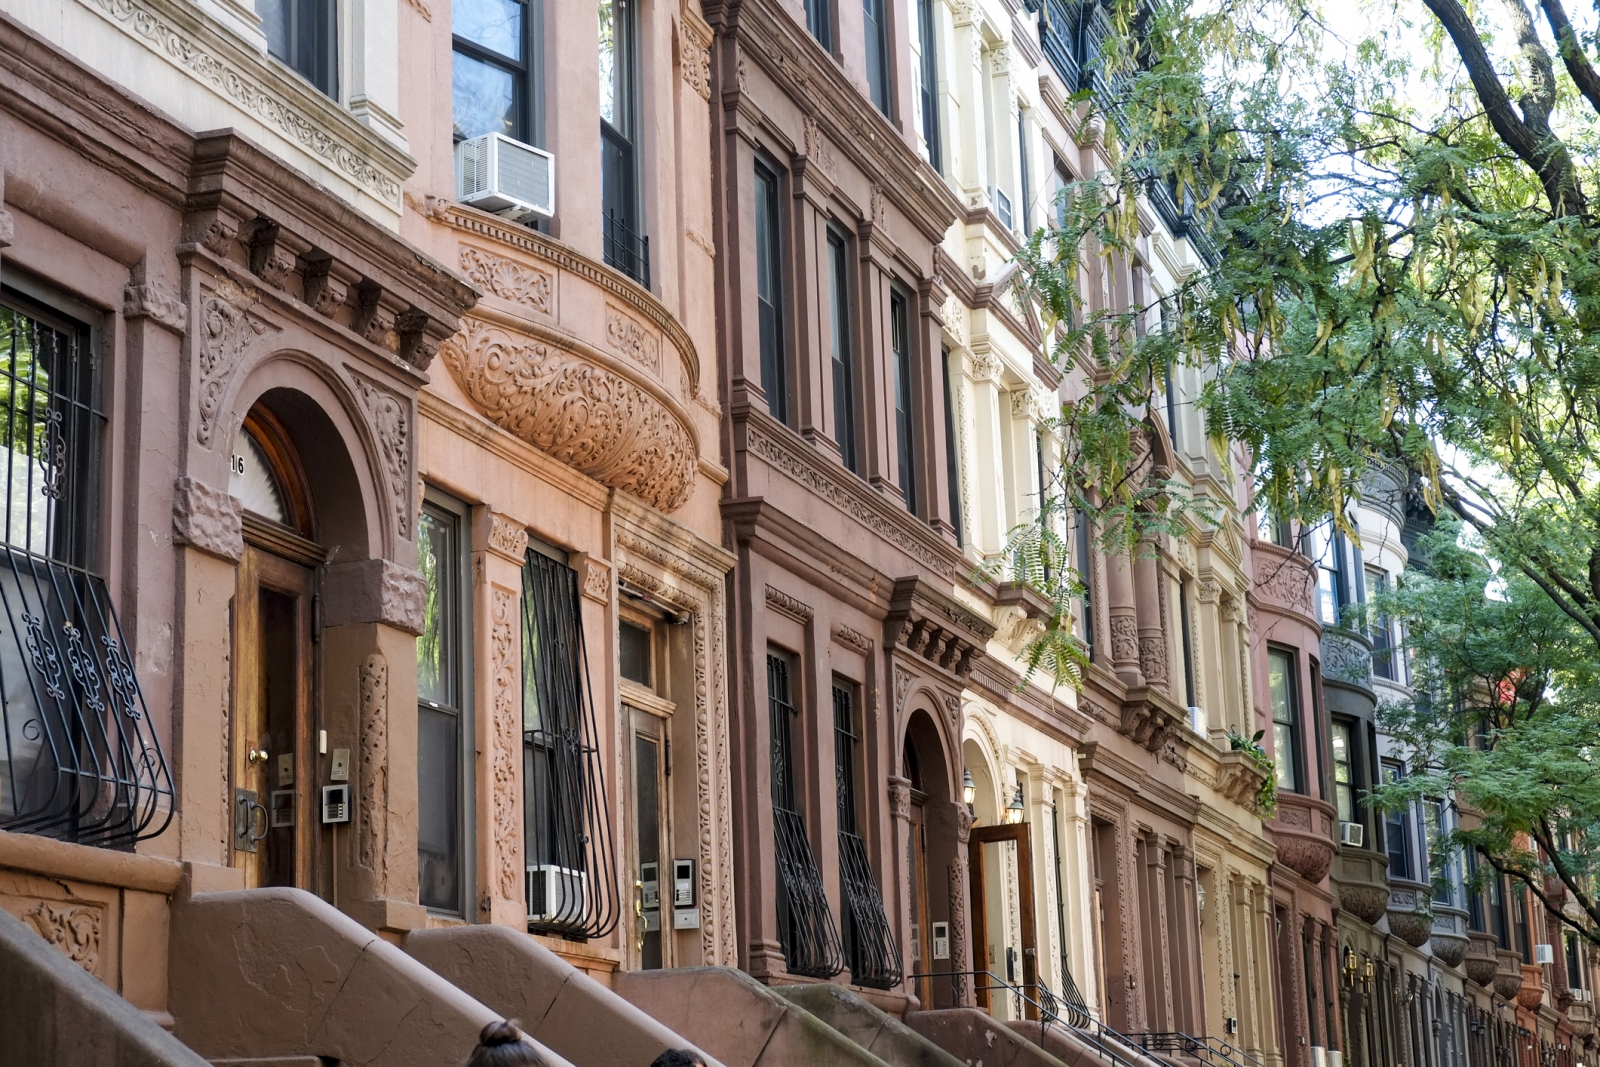 NYC Transfer Tax - Brownstone homes in NYC